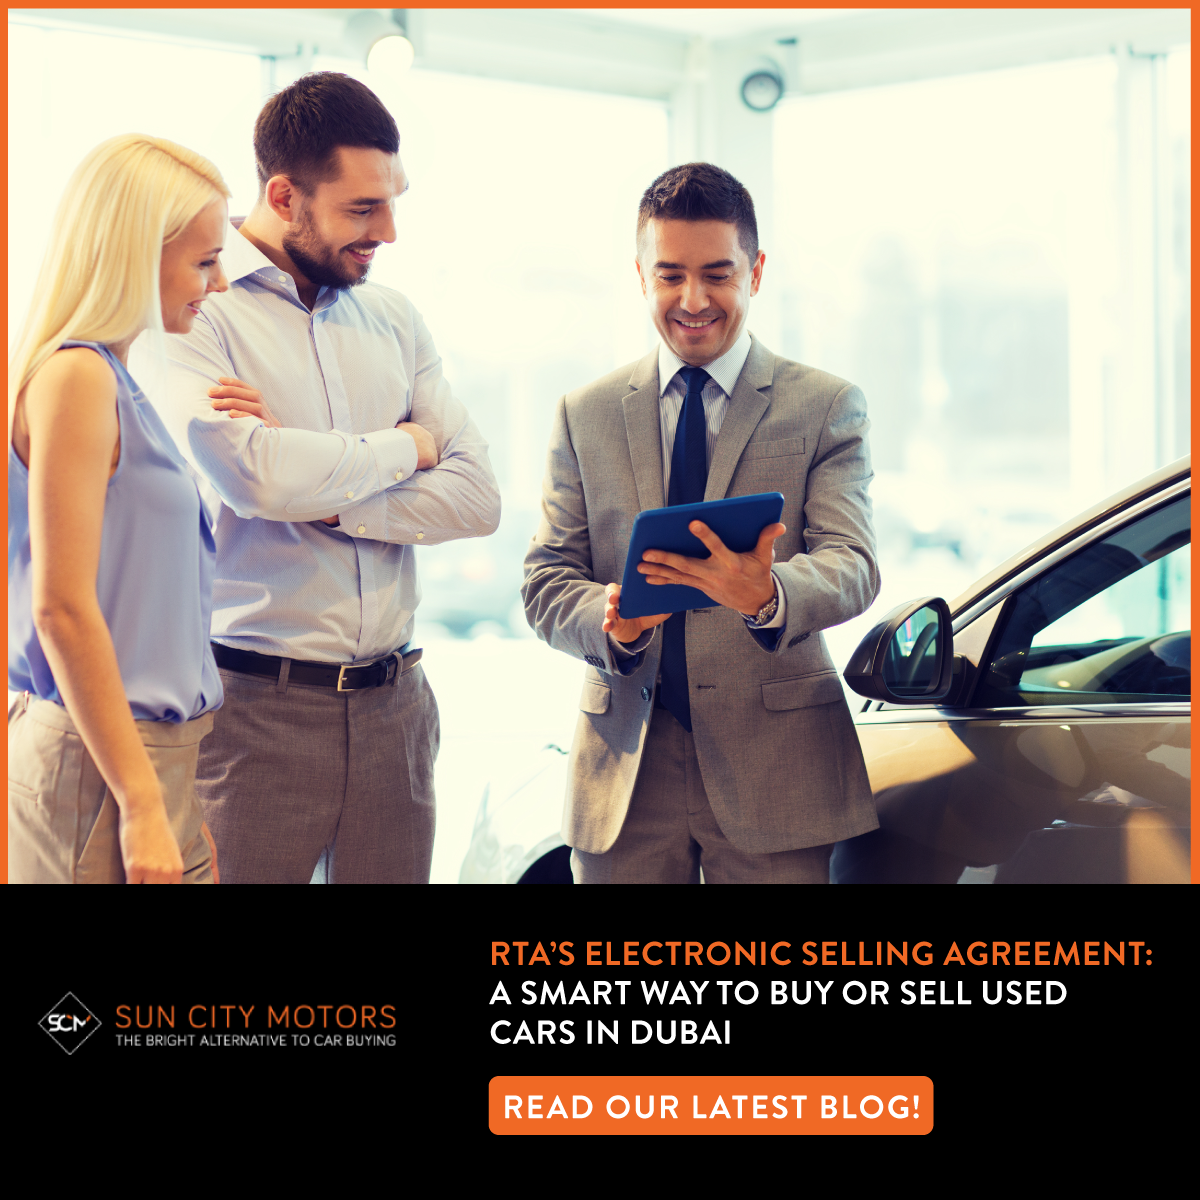 RTA’s Electronic Selling Agreement: A Smart Way to Buy or Sell Used Cars in Dubai